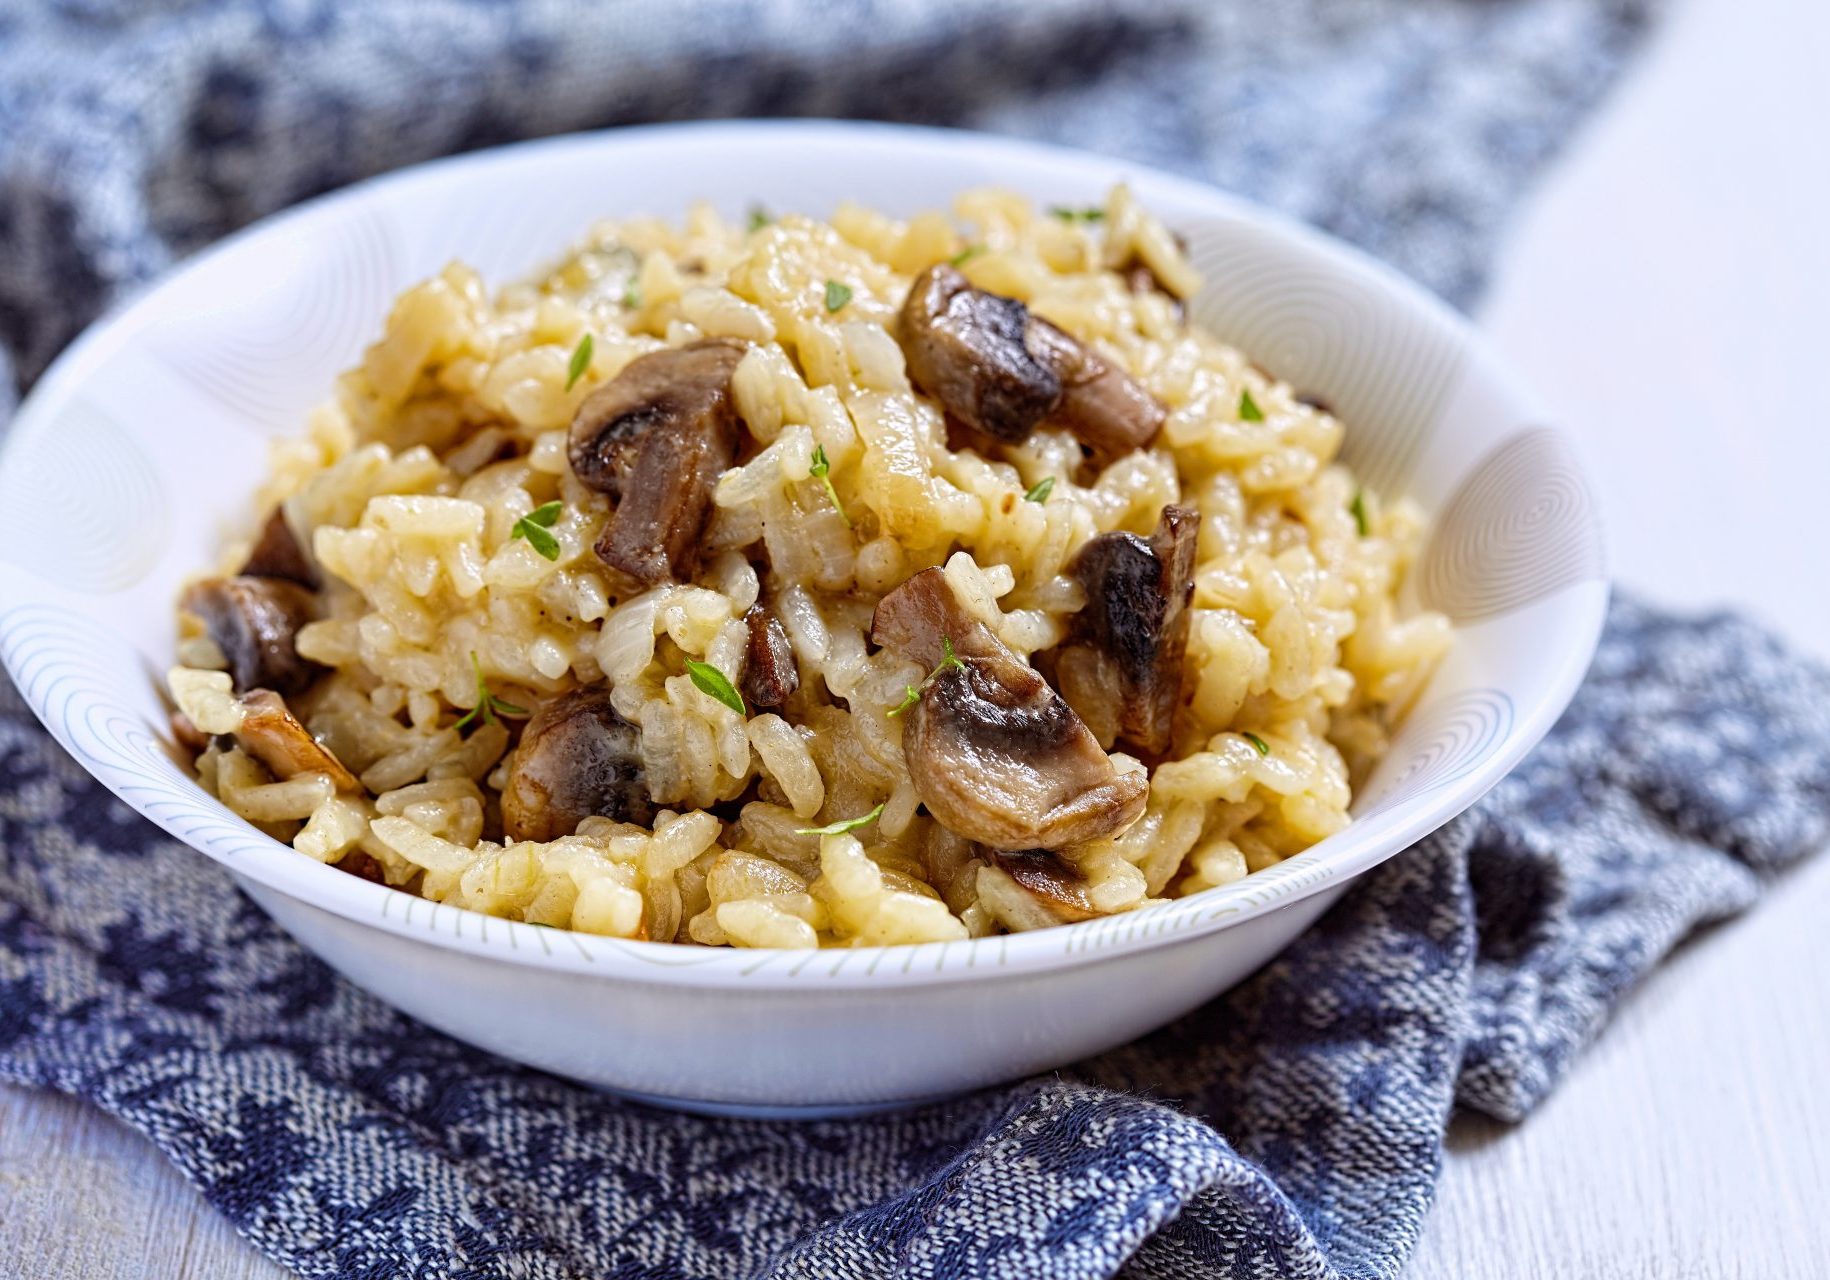 rice with mushrooms in a bowl on a blue napkin